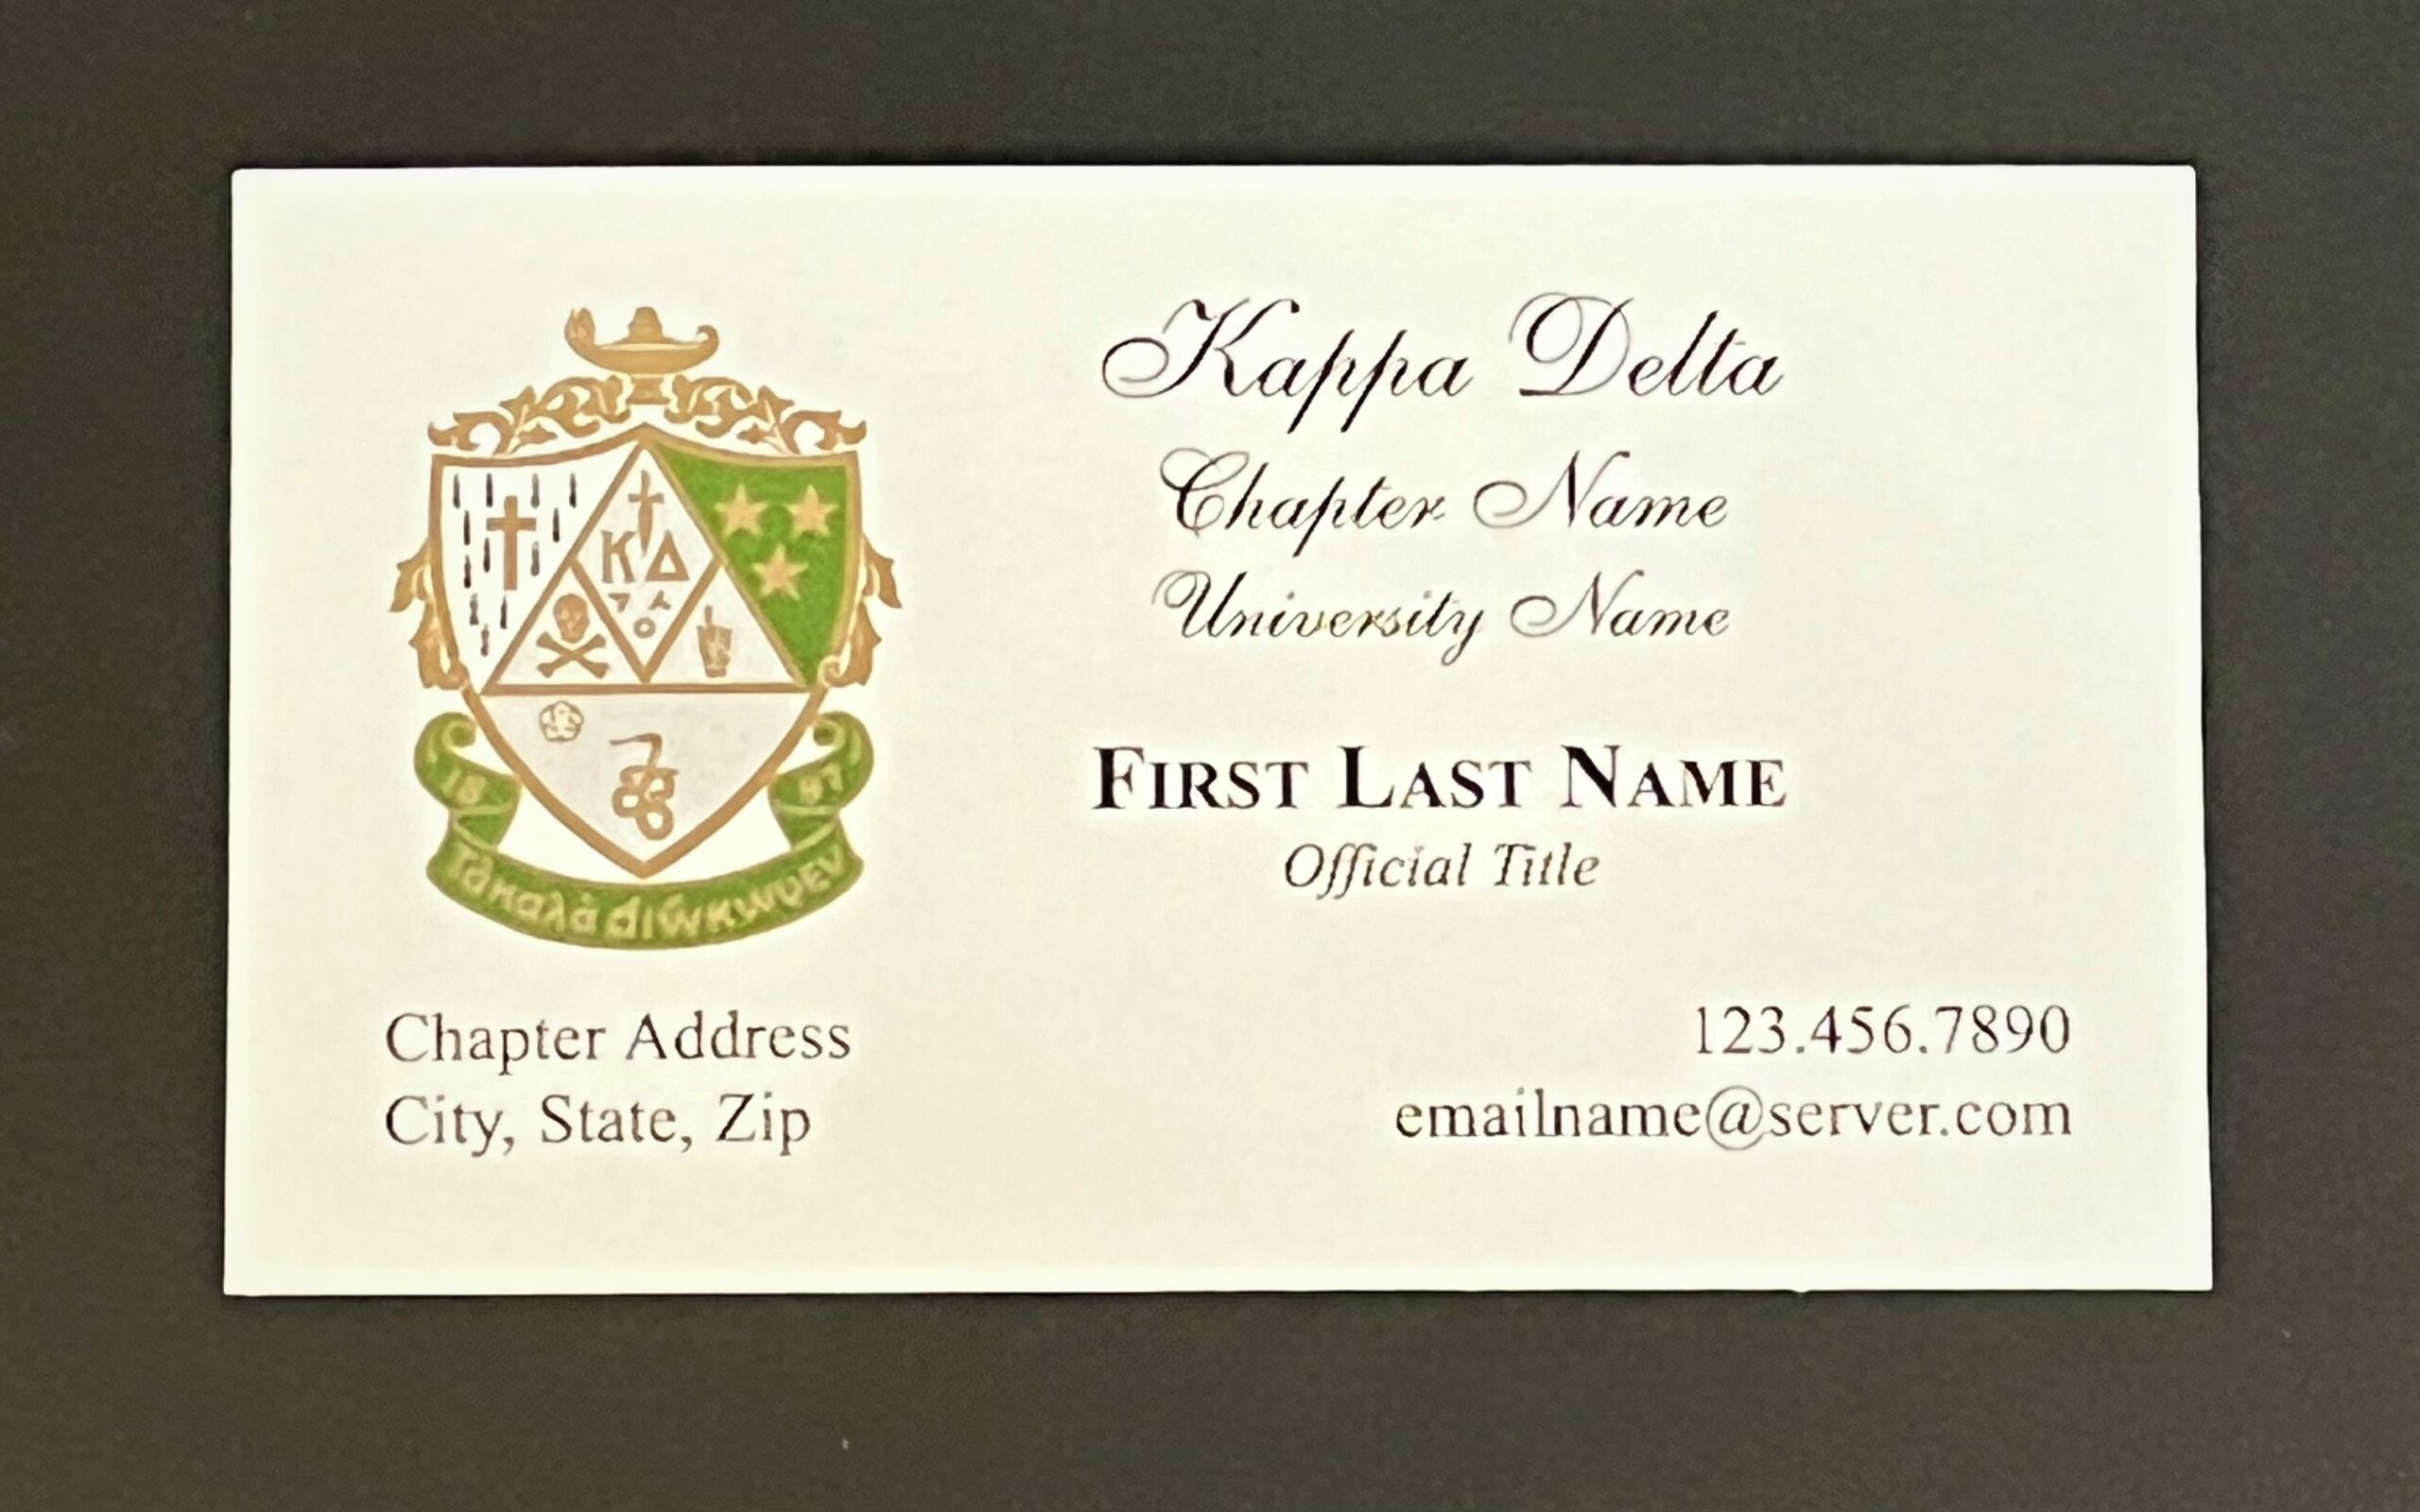 Business Cards Kappa Delta